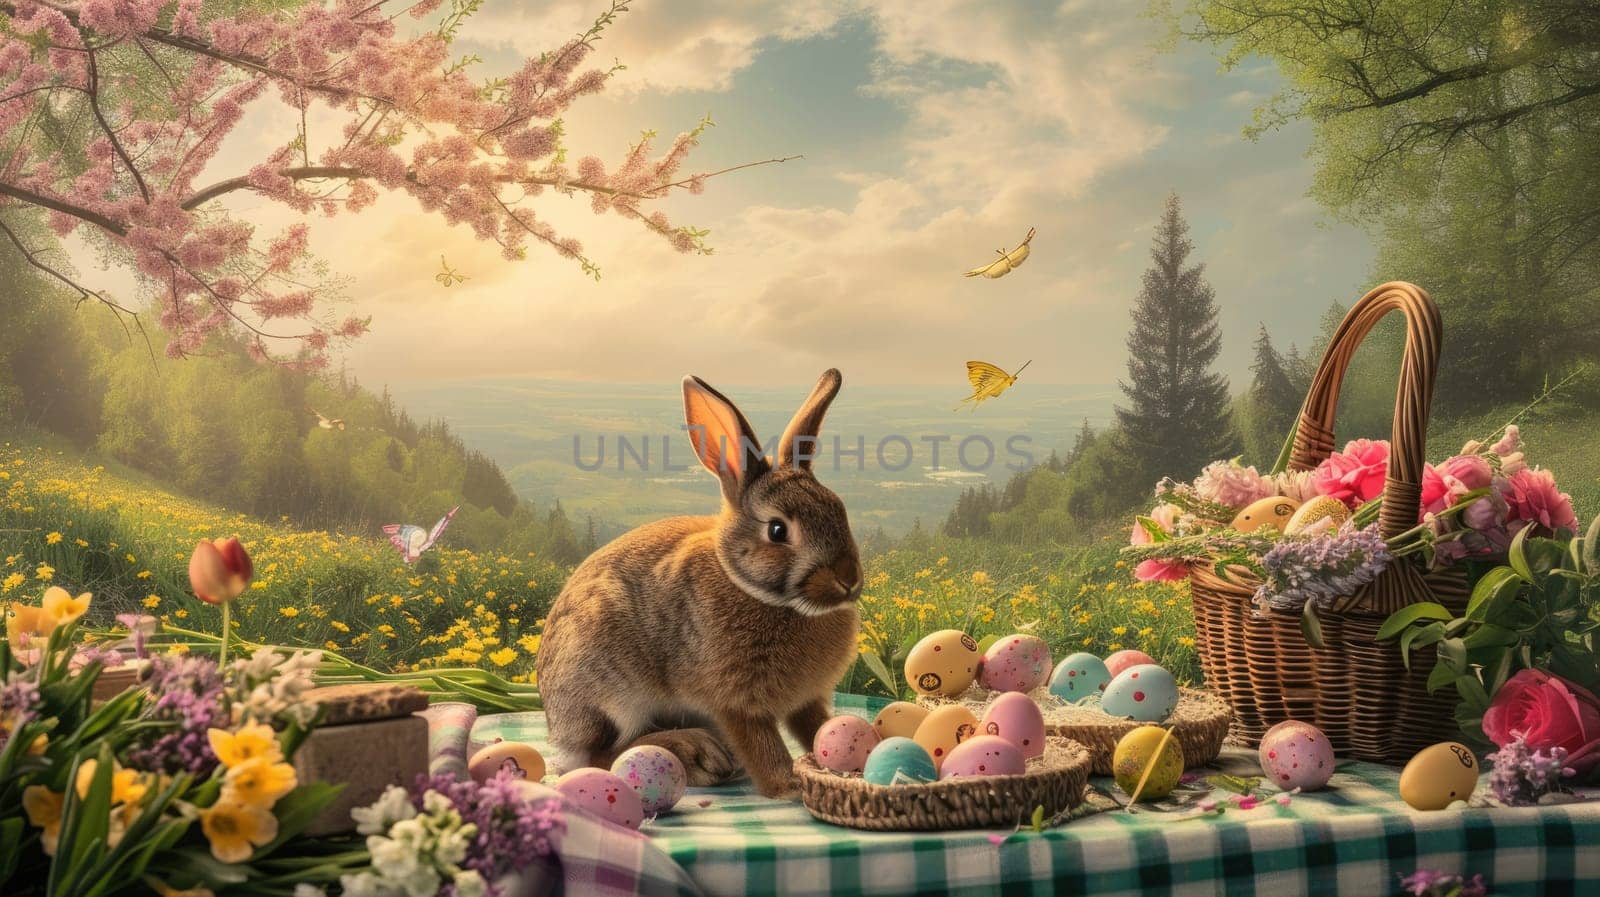 Rabbit on picnic table with eggs against sky and natural surroundings AIG42E by biancoblue